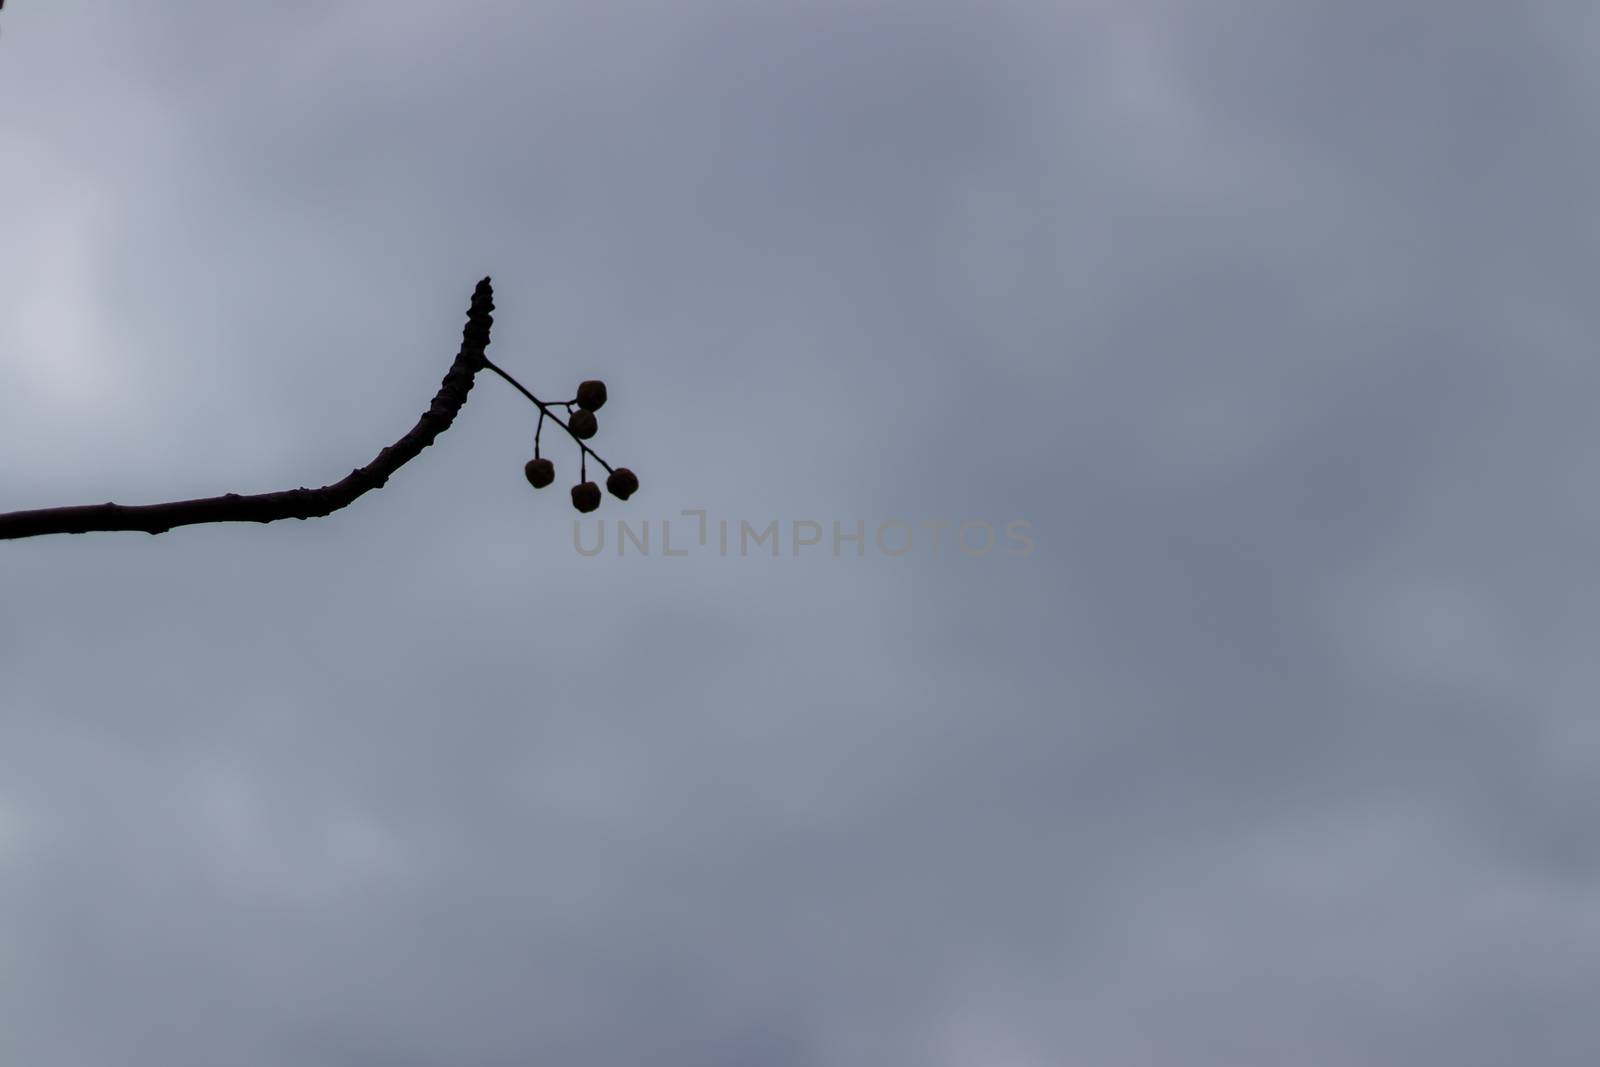 cute flower and branche in shadow under gray sky. photo has taken at izmir/turkey.